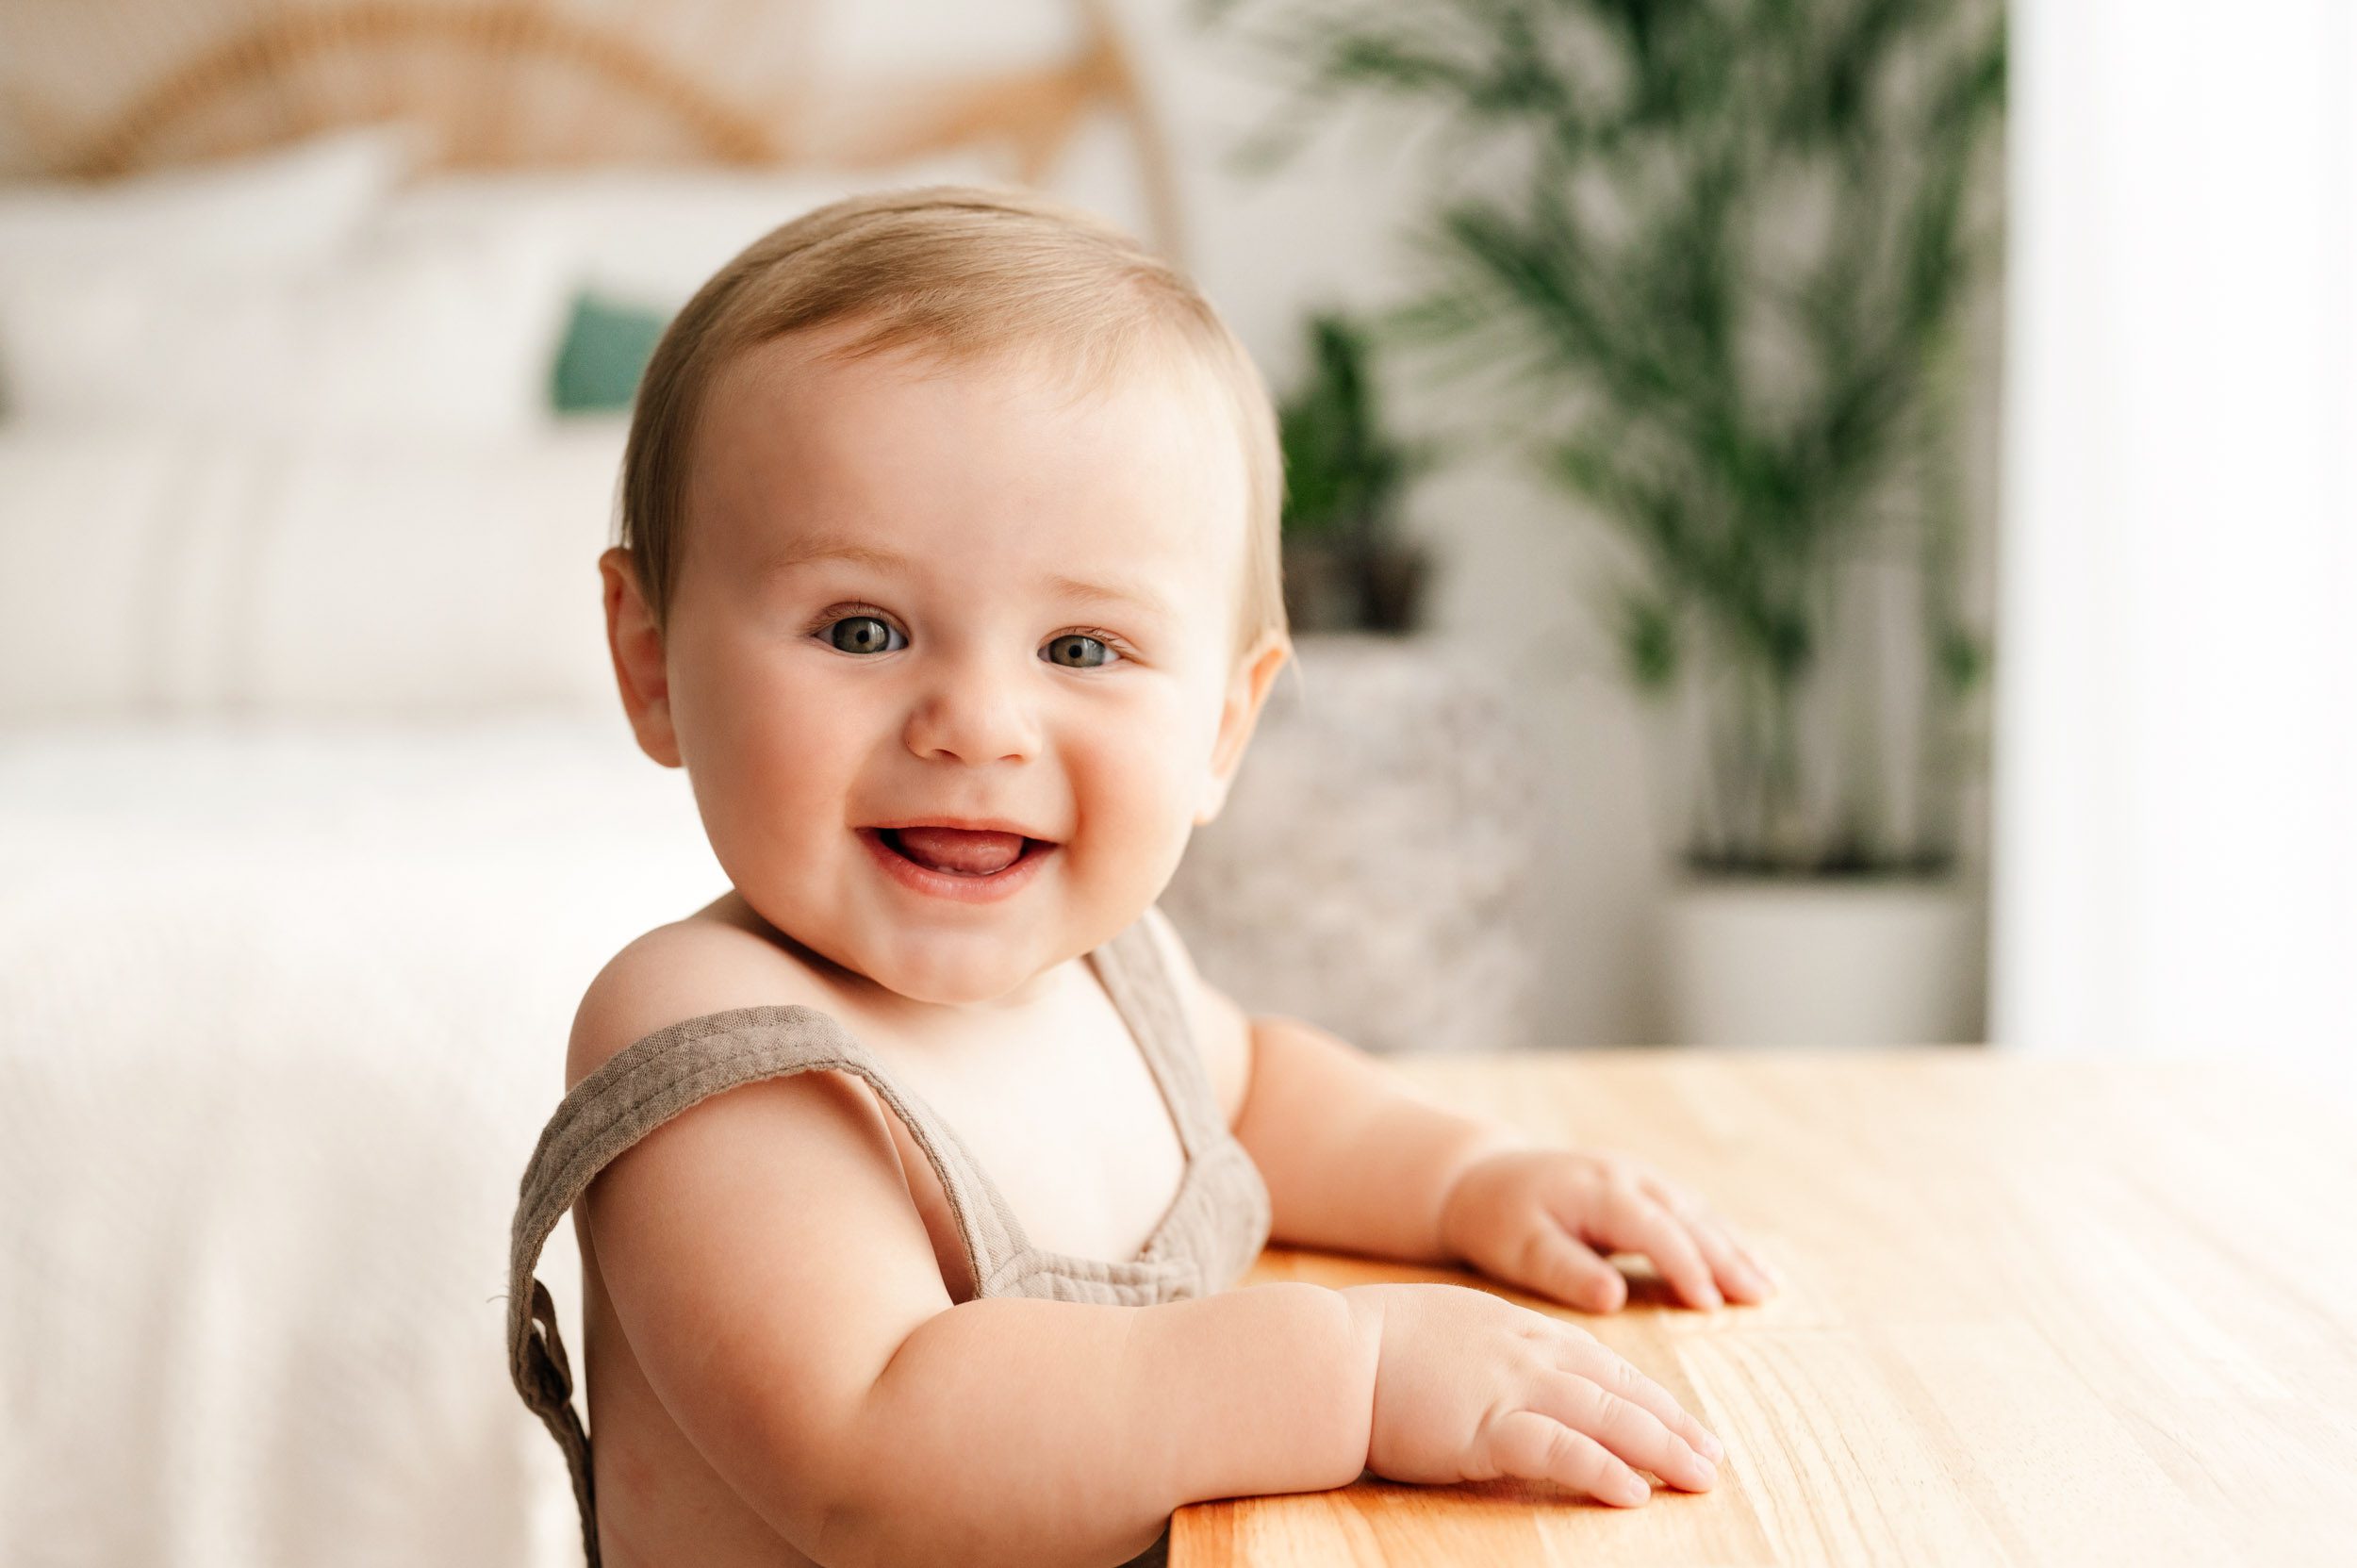 a baby boy holding onto a bench and smiling at the camera during a baby milestone photoshoot